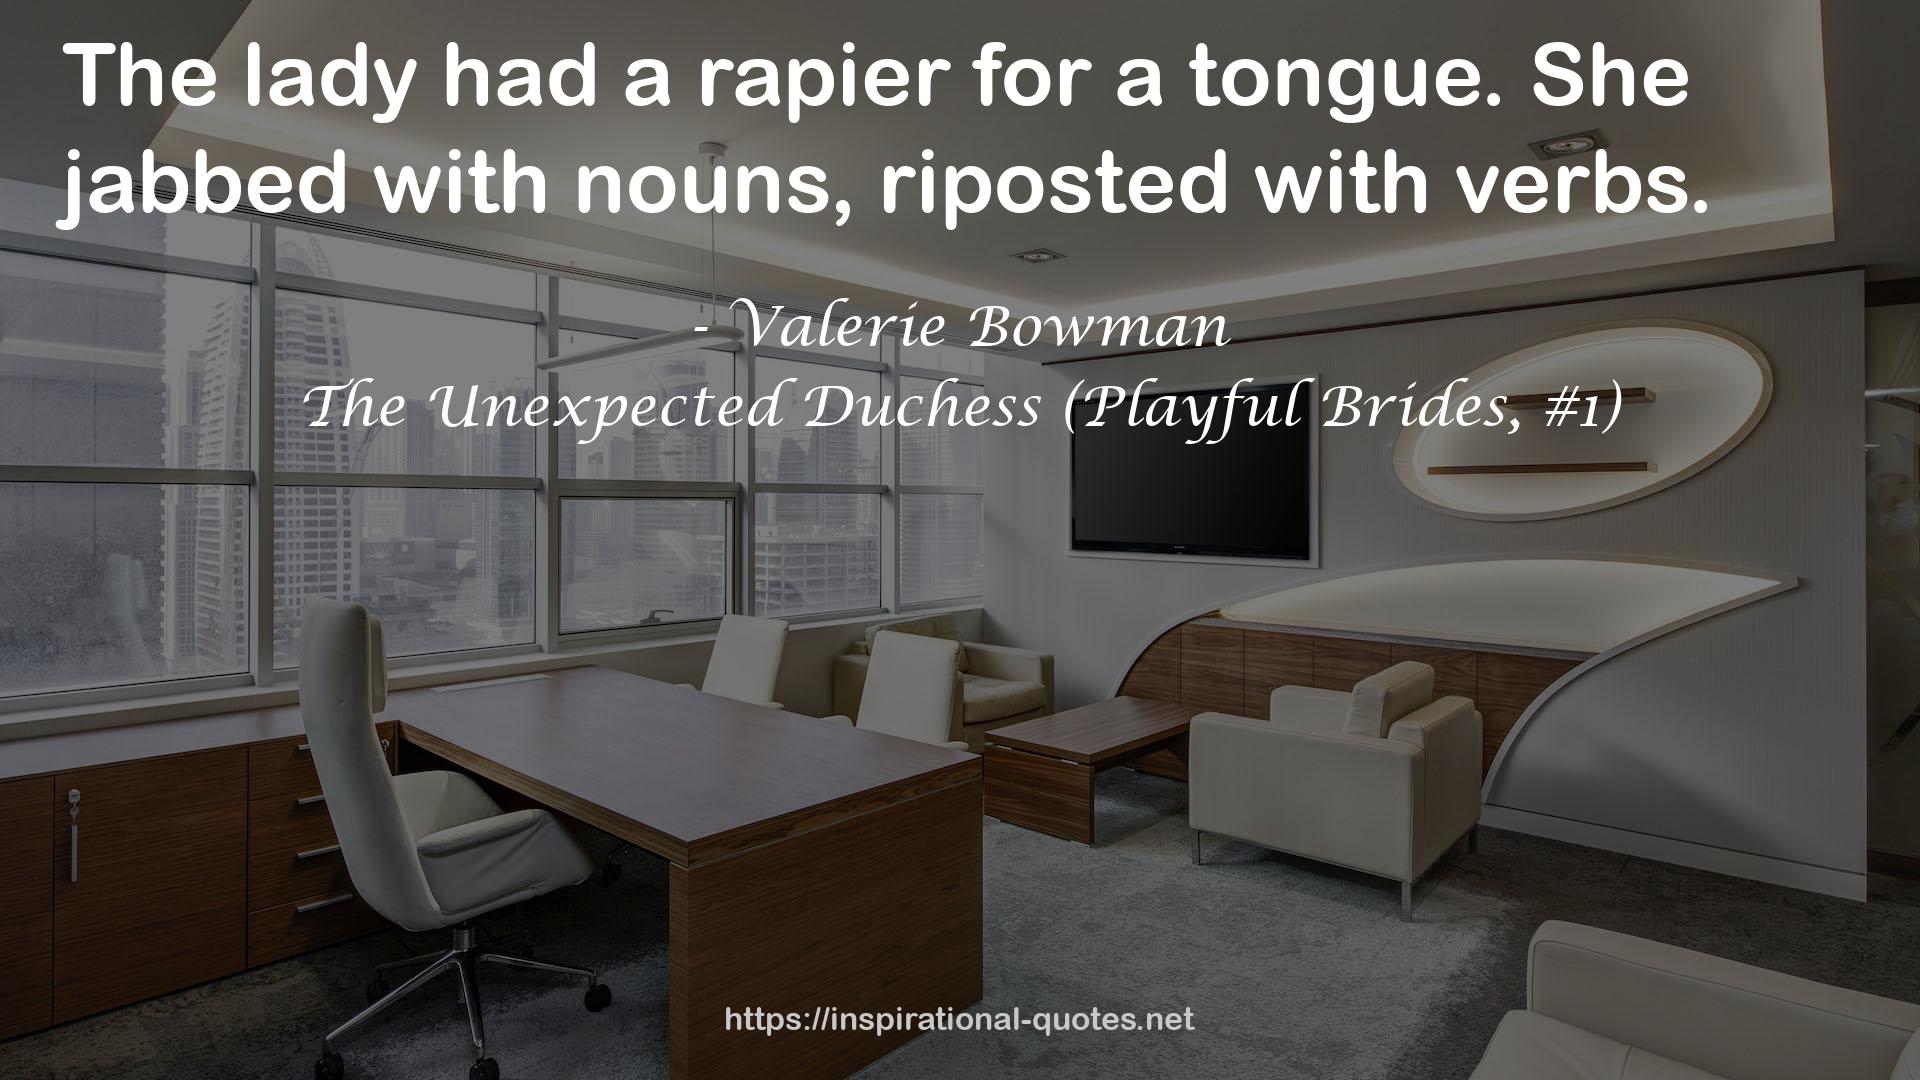 The Unexpected Duchess (Playful Brides, #1) QUOTES